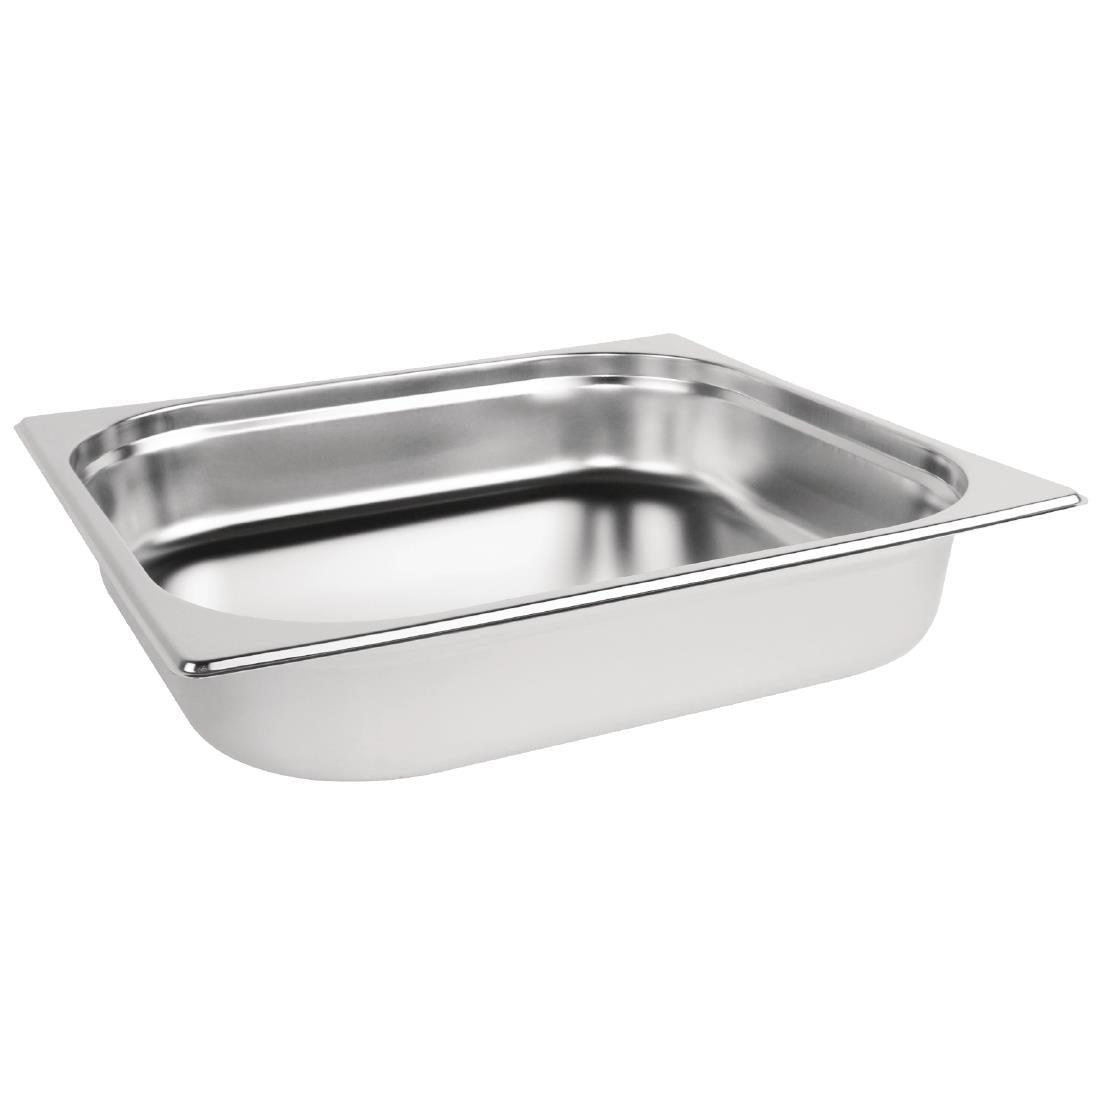 Vogue Stainless Steel 2/3 Gastronorm Tray 65mm - HospoStore